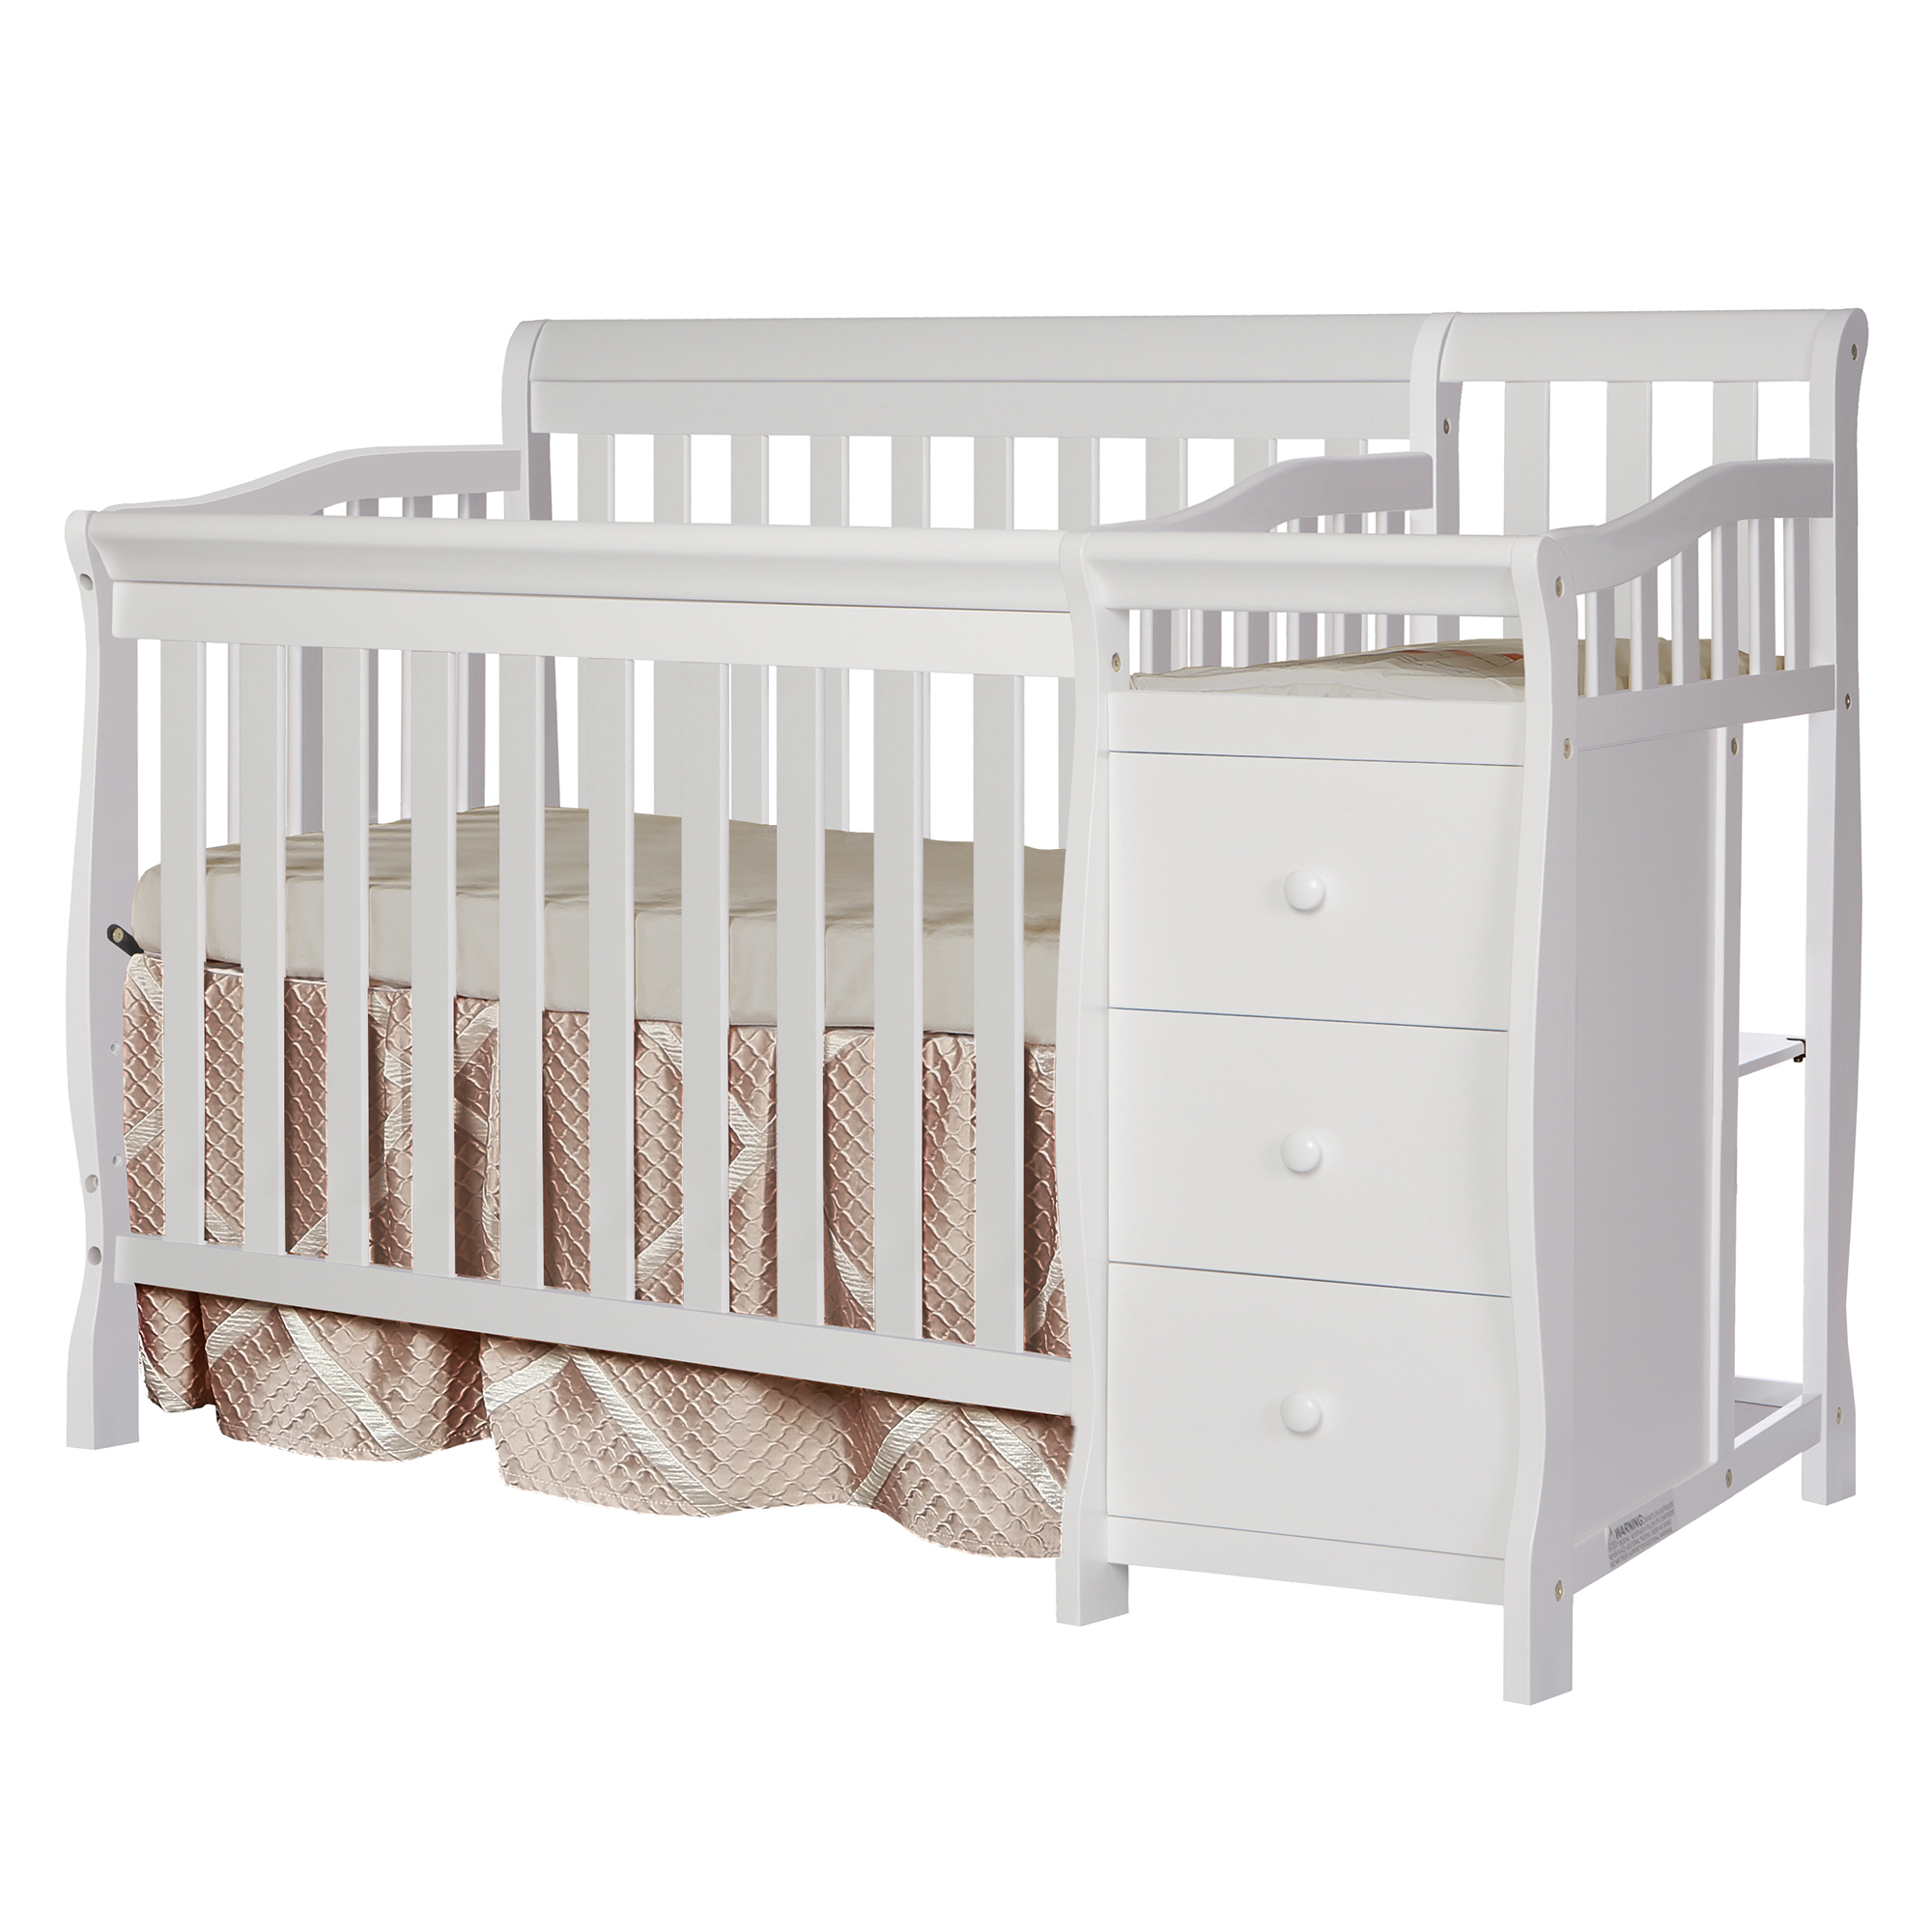 Dream On Me Jayden 4-in-1 Mini Convertible Crib and Changer, White - image 1 of 6